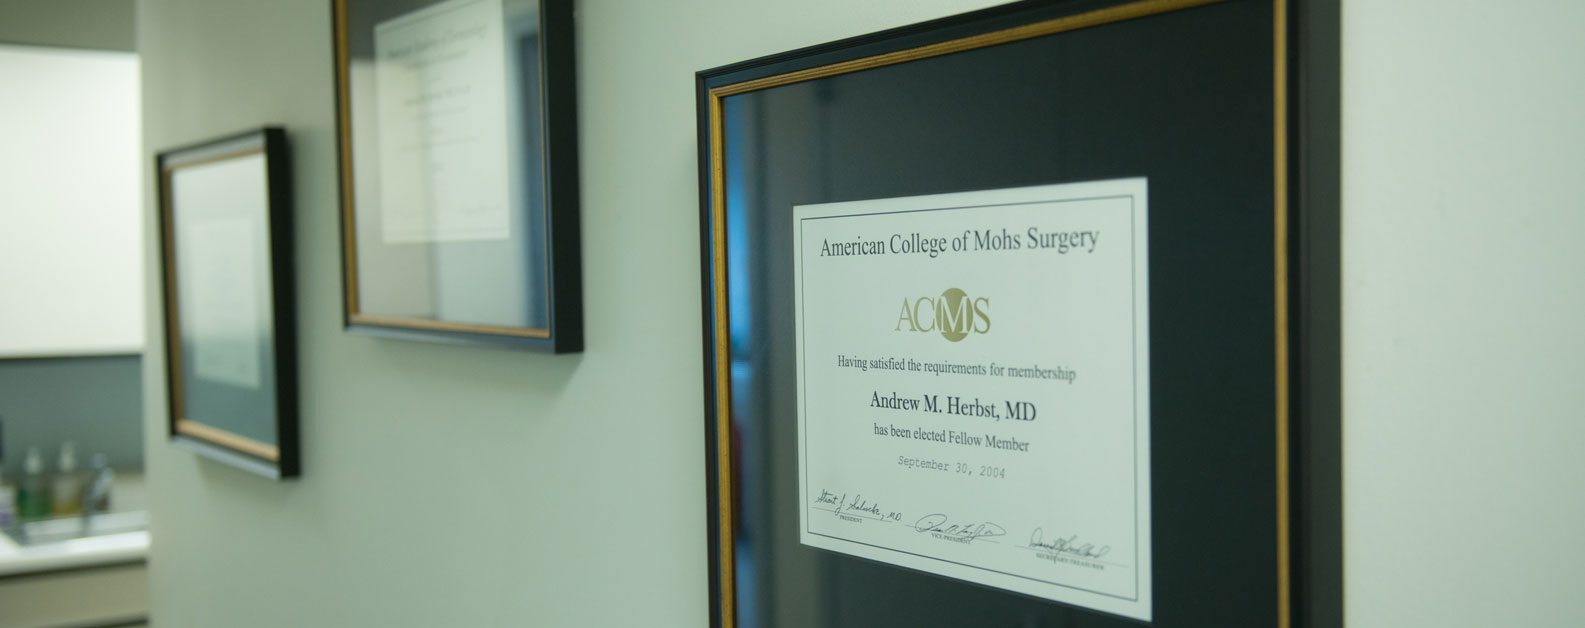 Mohs Surgery Certification - Dr. Herbst - Skin Cancer Center of CT